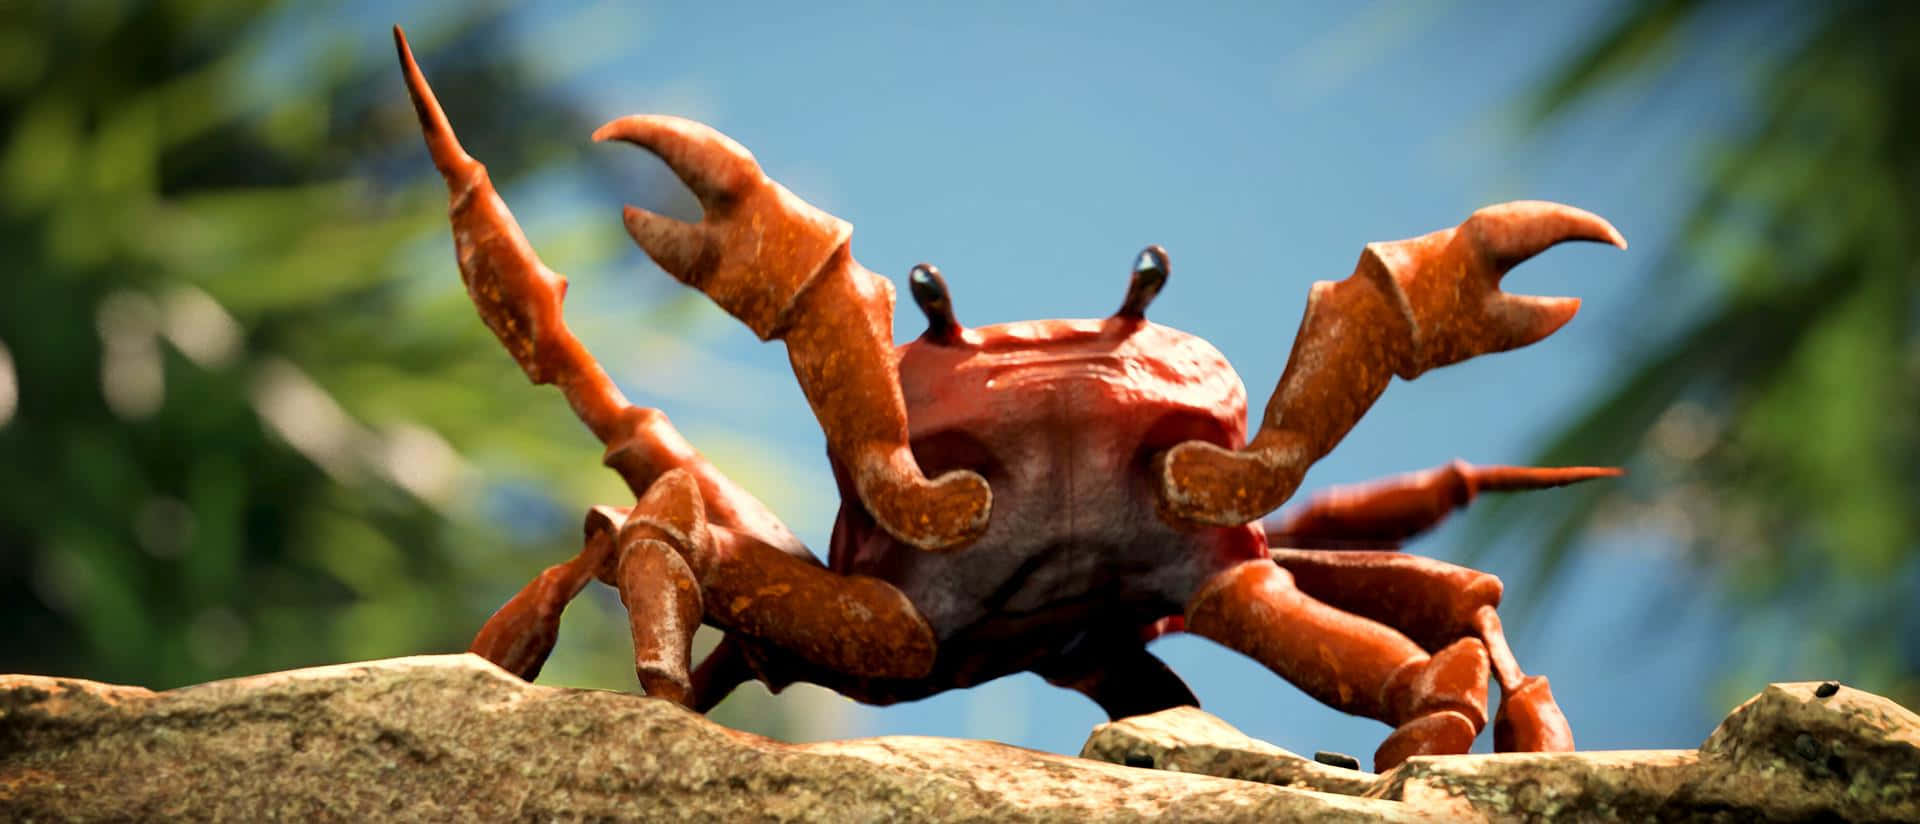 70 Crab HD Wallpapers and Backgrounds